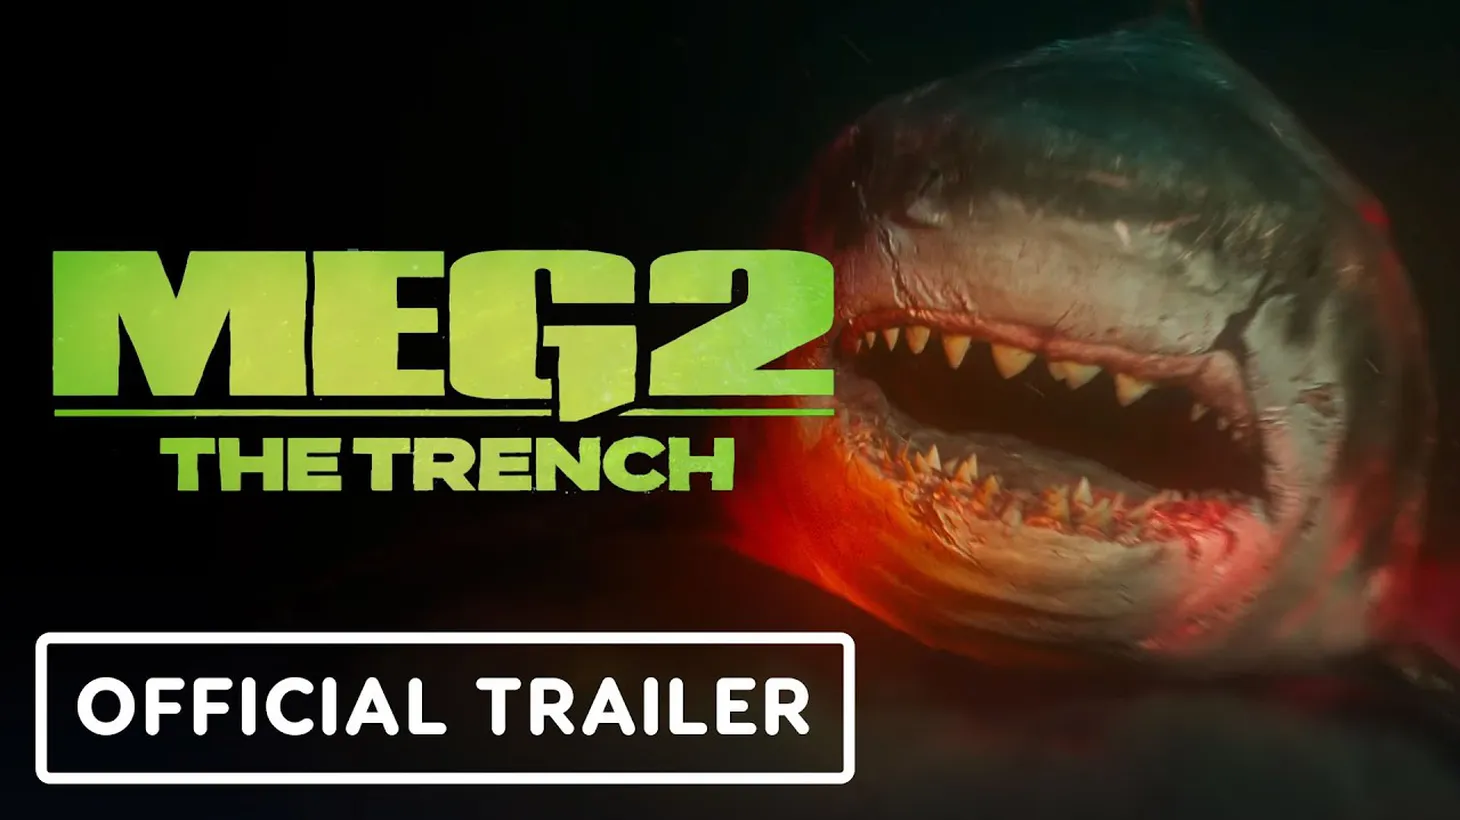 In this sequel, Jason Statham once again faces off against a giant prehistoric shark.